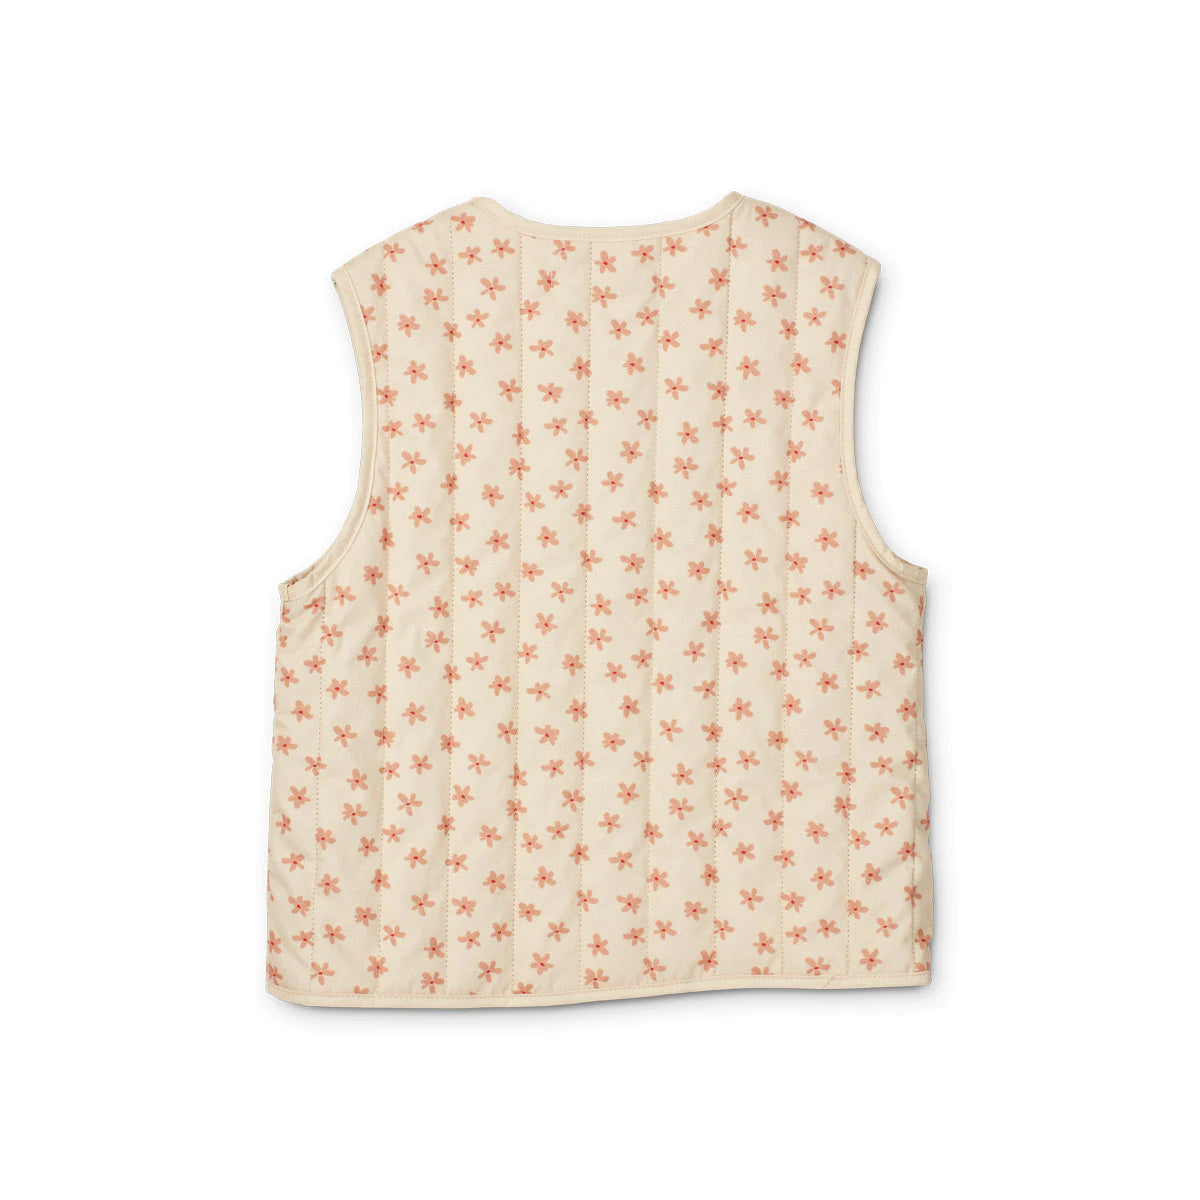 PAROS PRINTED VEST - FLORAL/SEA SHELL MIX, LIEWOOD